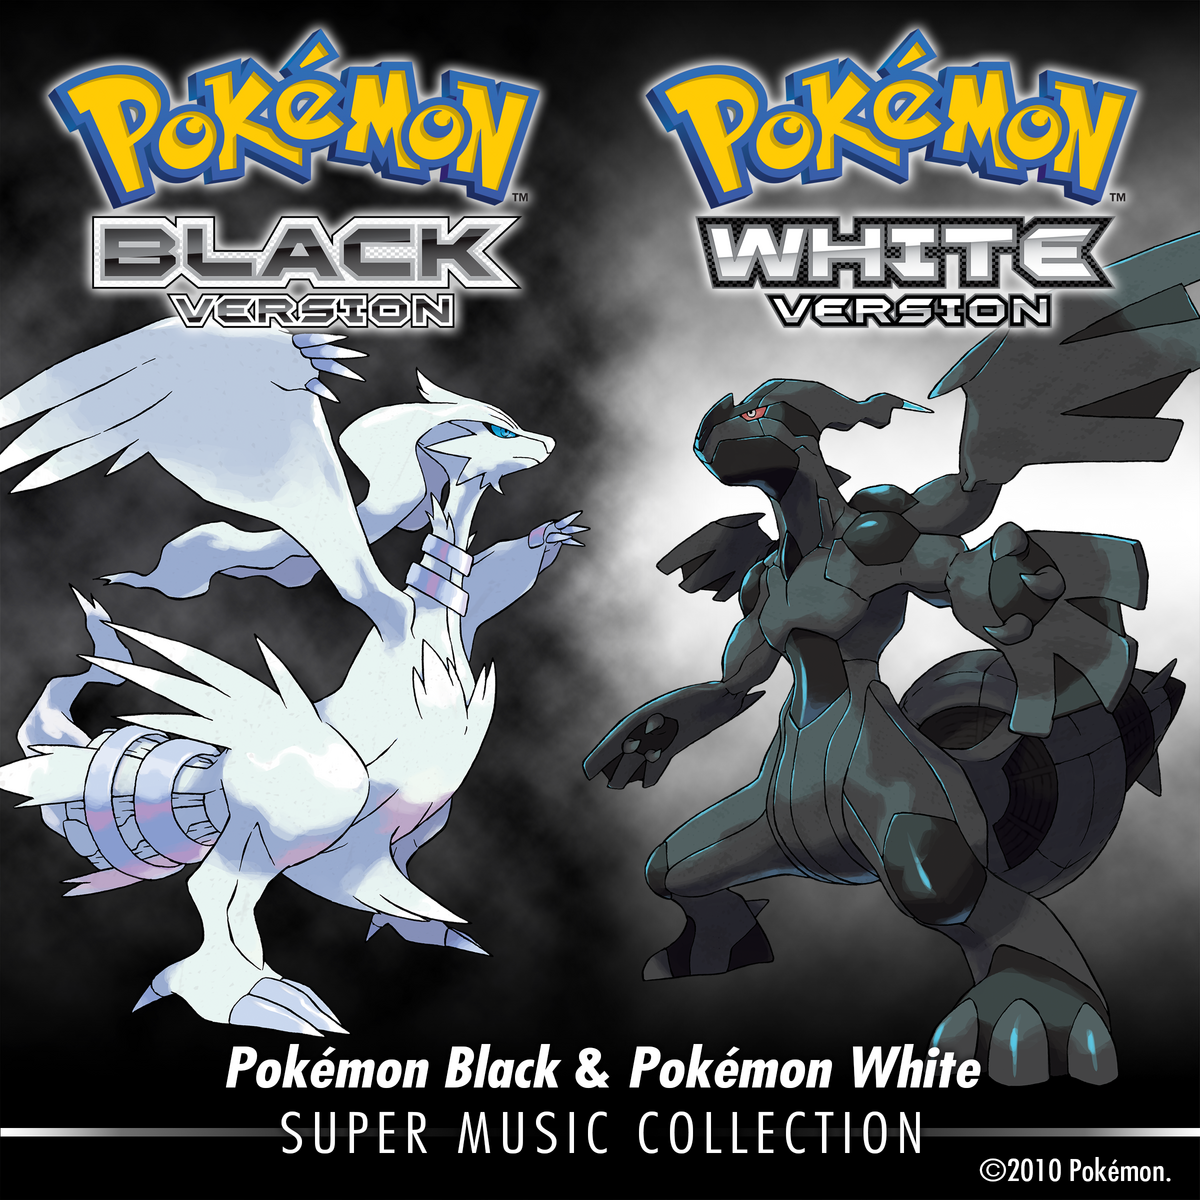 Review: Pokémon Black and White Mix New Monsters, Old Fun